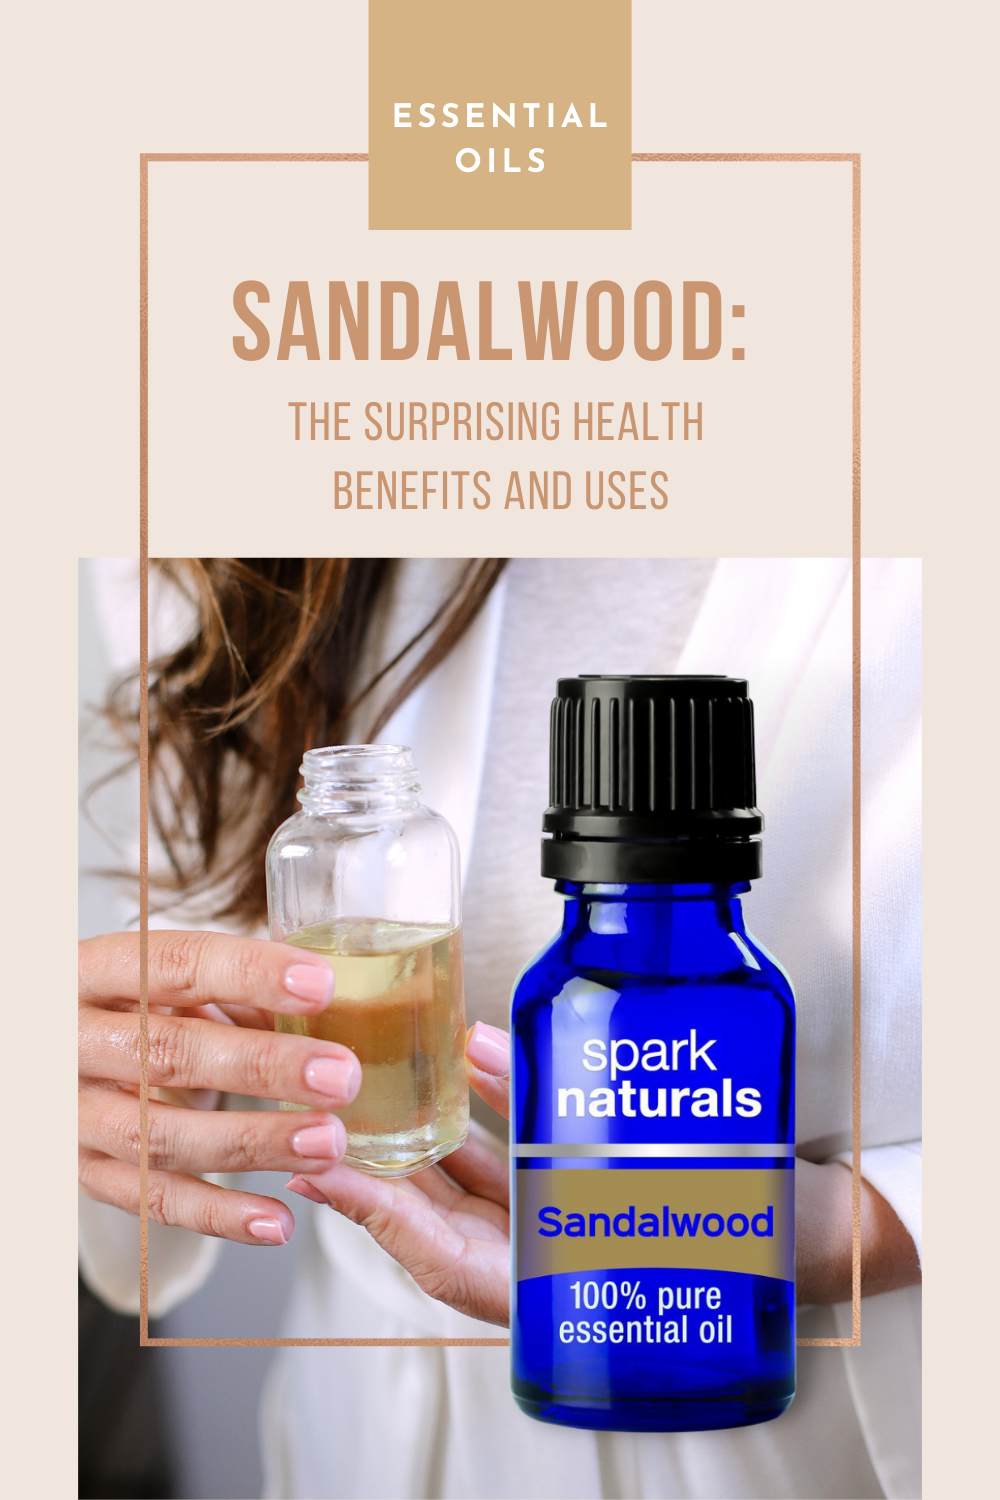 Surprising Sandalwood Essential Oil Health Benefits and Uses! Sandalwood essential oil has become a must-have in my natural medicine cabinet. We love using it in diffuser blends, but we also use it for medicinal purposes. It's surprising how versatile Sandalwood is!